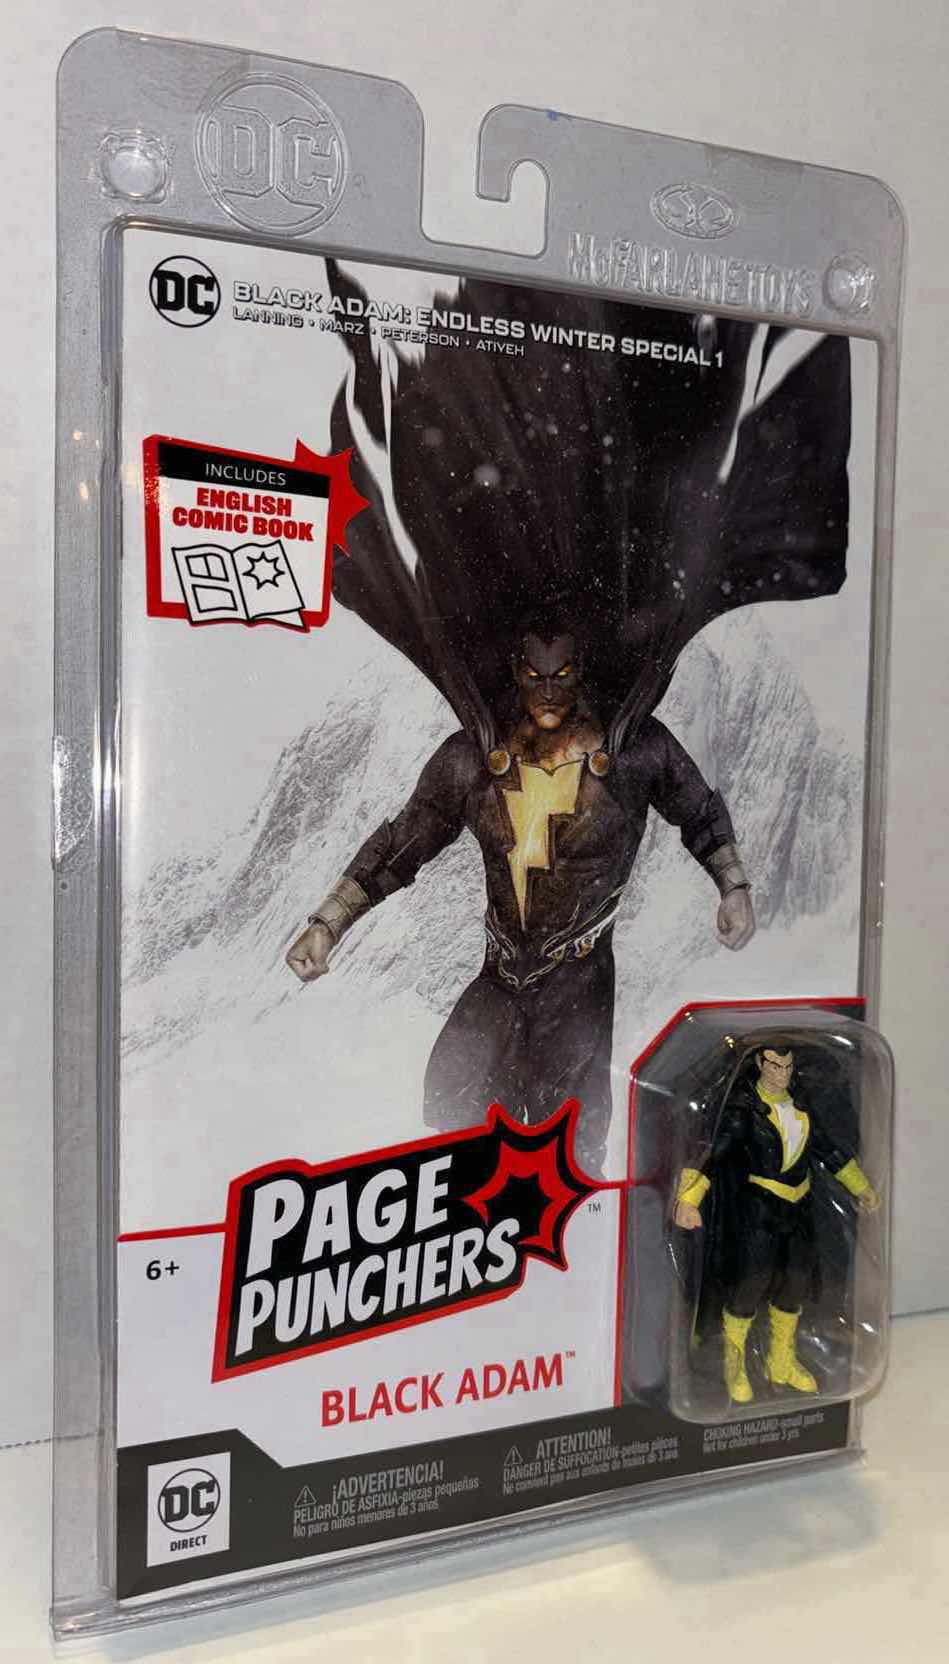 Photo 3 of NEW MCFARLANE TOYS DC DIRECT 2-PACK PAGE PUNCHERS 3” ACTION FIGURE & ENGLISH COMIC BOOK, “BLACK ADAM” & “BLACK ADAM: ENDLESS WINTER SPECIAL 1” COMIC BOOK